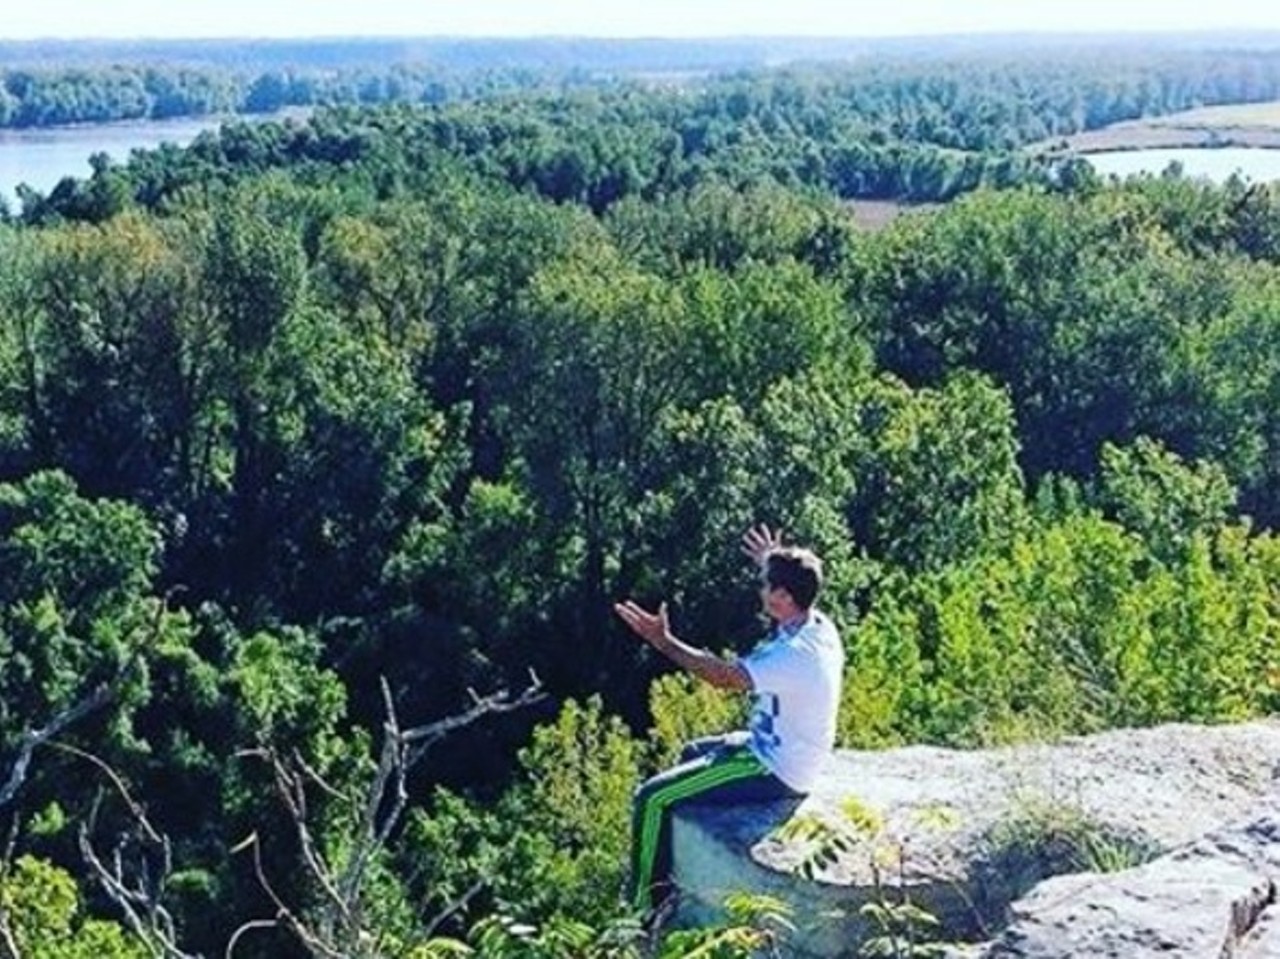 Klondike Park also has a lookout bluff, where you'll have scenic views of both the Katy Trail and the Missouri River Valley. Don't miss it. Photo courtesy of Instagram / canaday54321.